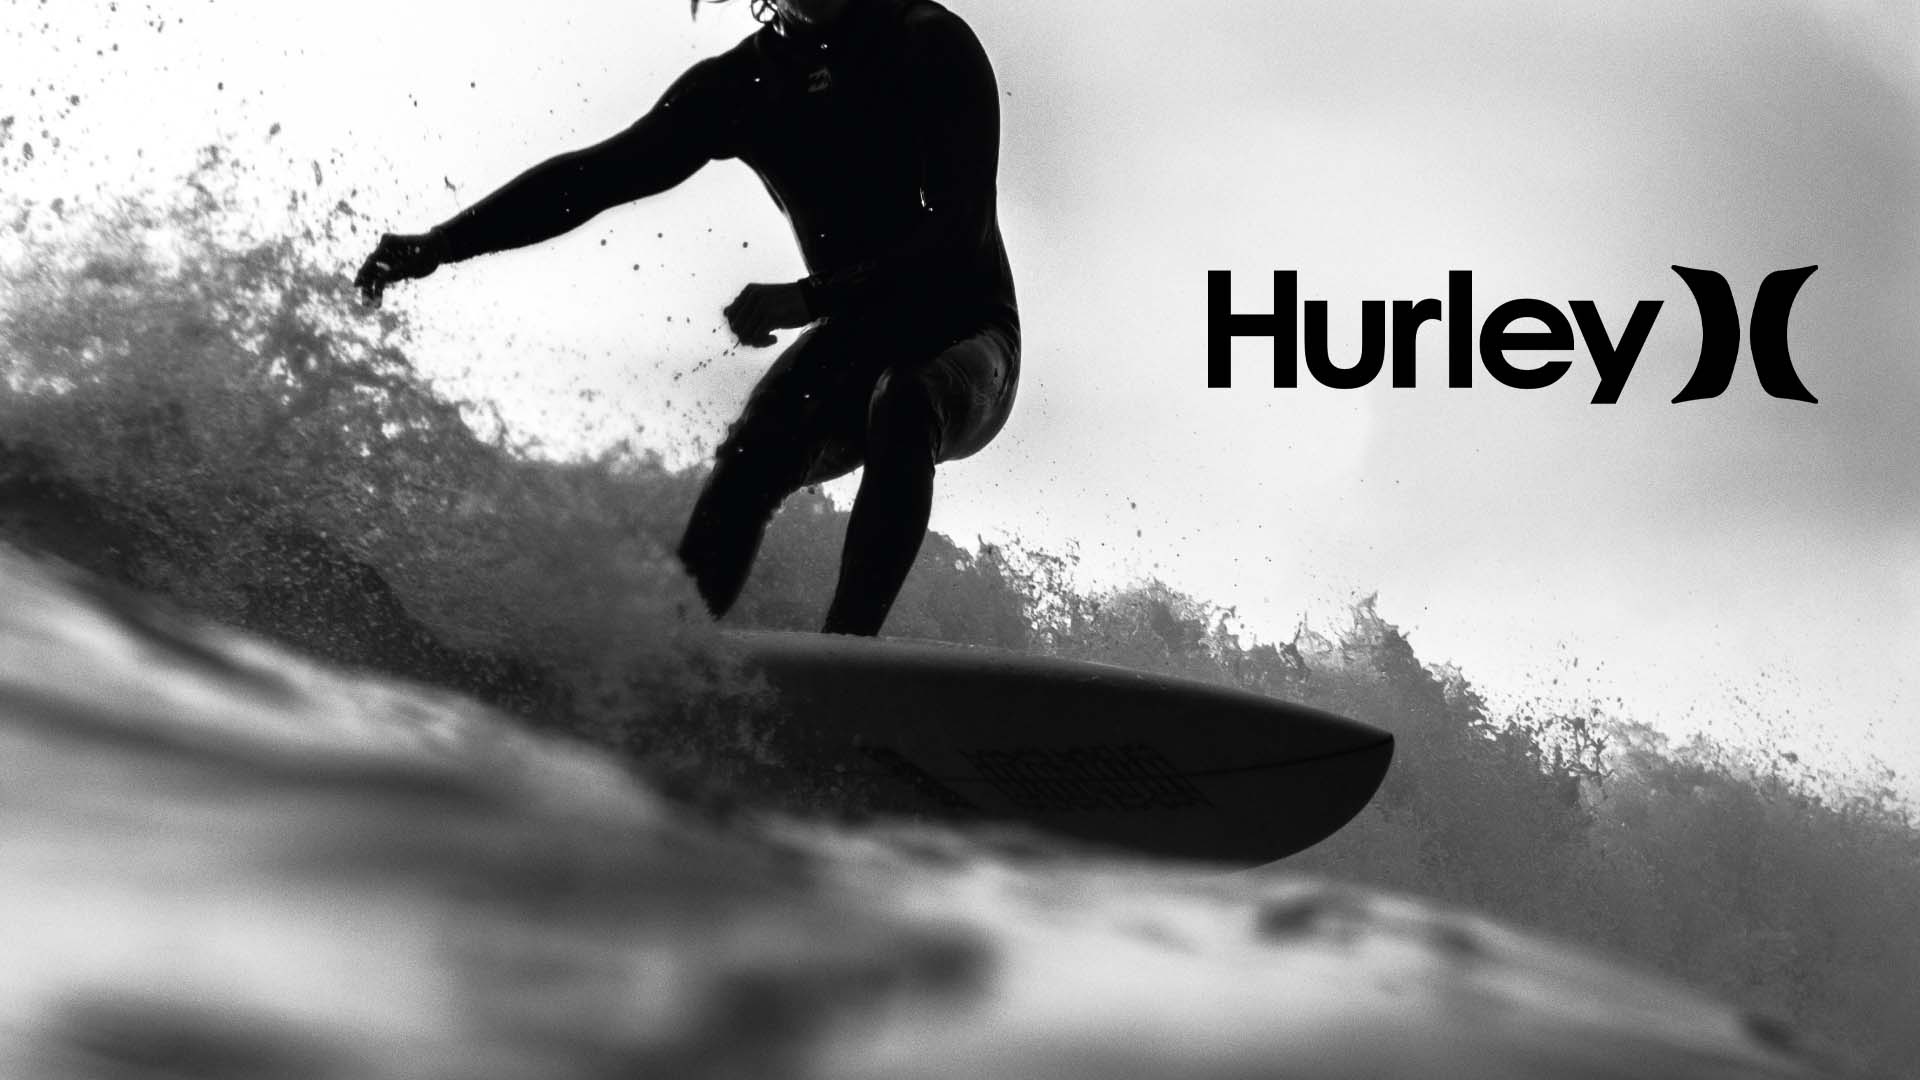 Hurley shop at Pukas, Surf shop merchandise, Hurley clothing and accessories, Stylish apparel, 1920x1080 Full HD Desktop